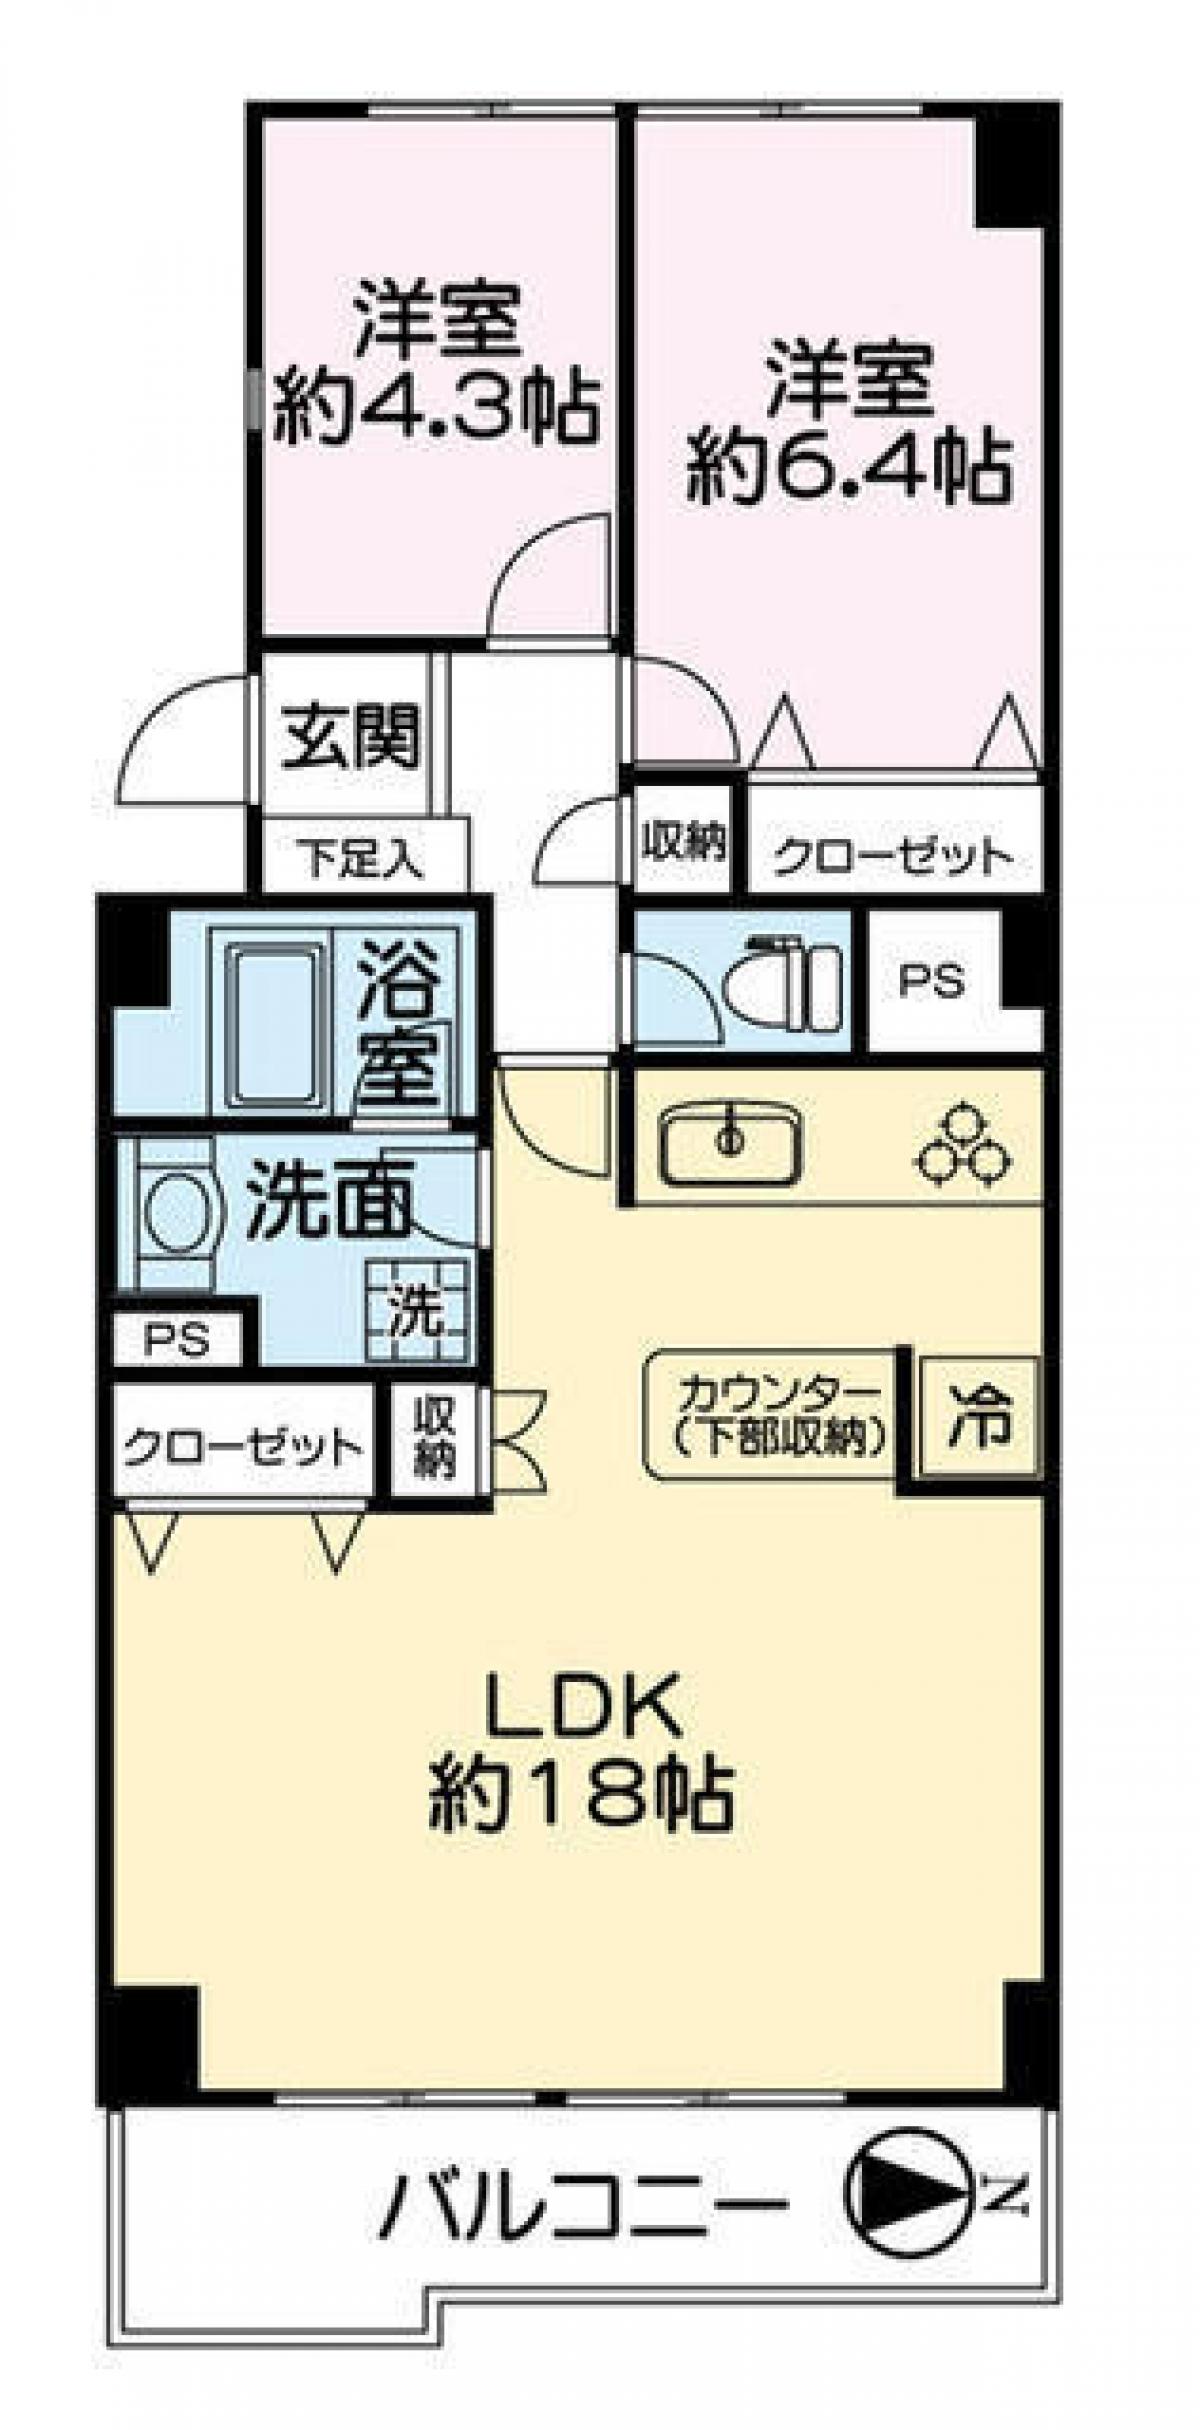 Picture of Apartment For Sale in Koto Ku, Tokyo, Japan